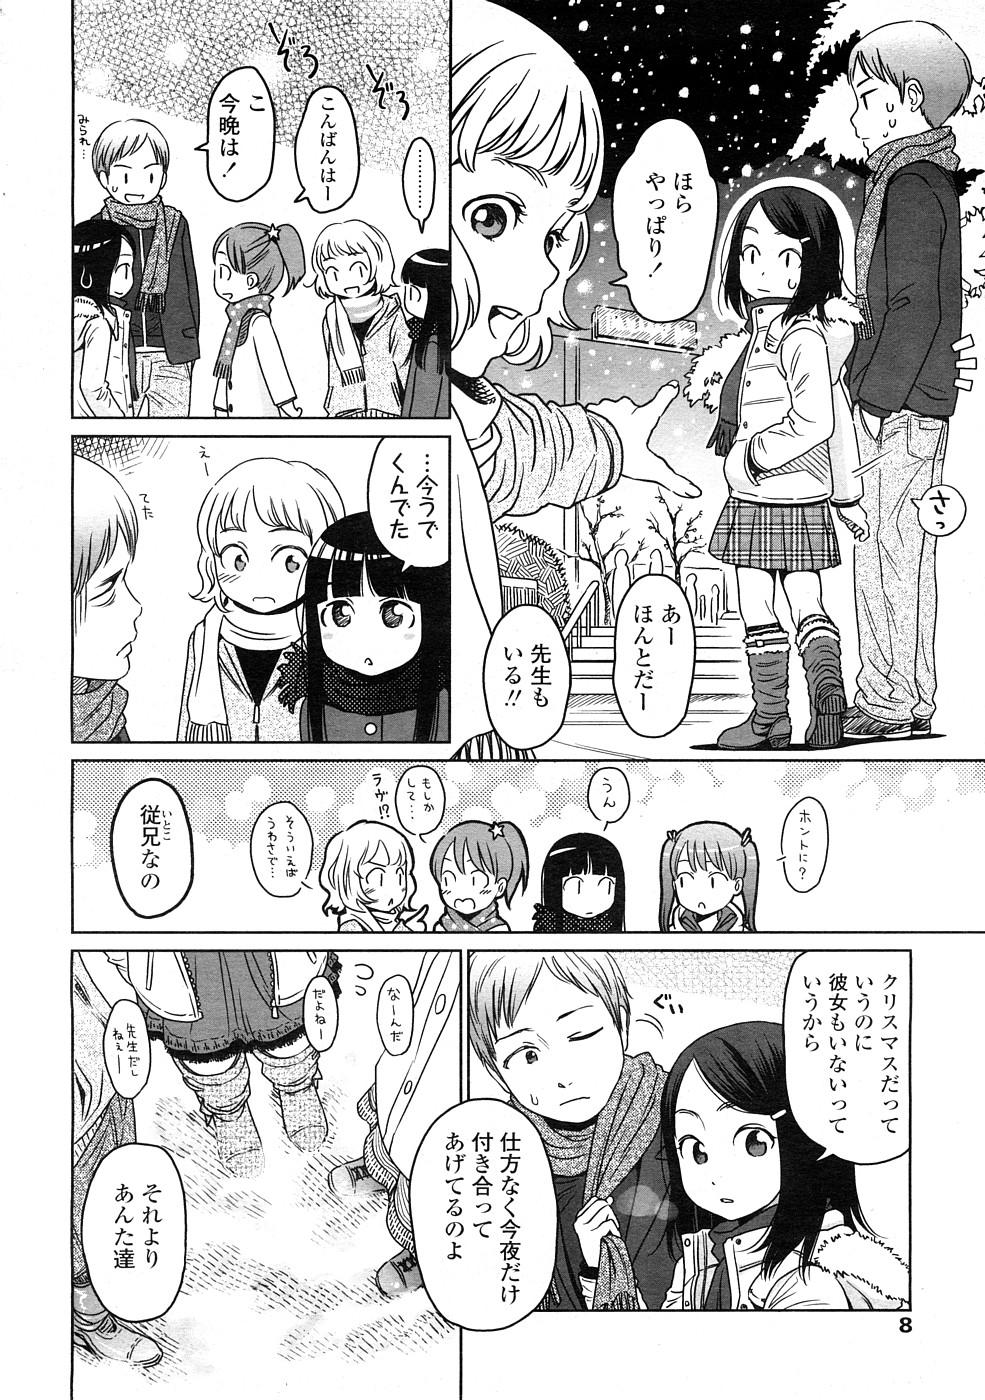 Athletic Comic LO 2009-02 Vol. 59 Scandal - Page 8